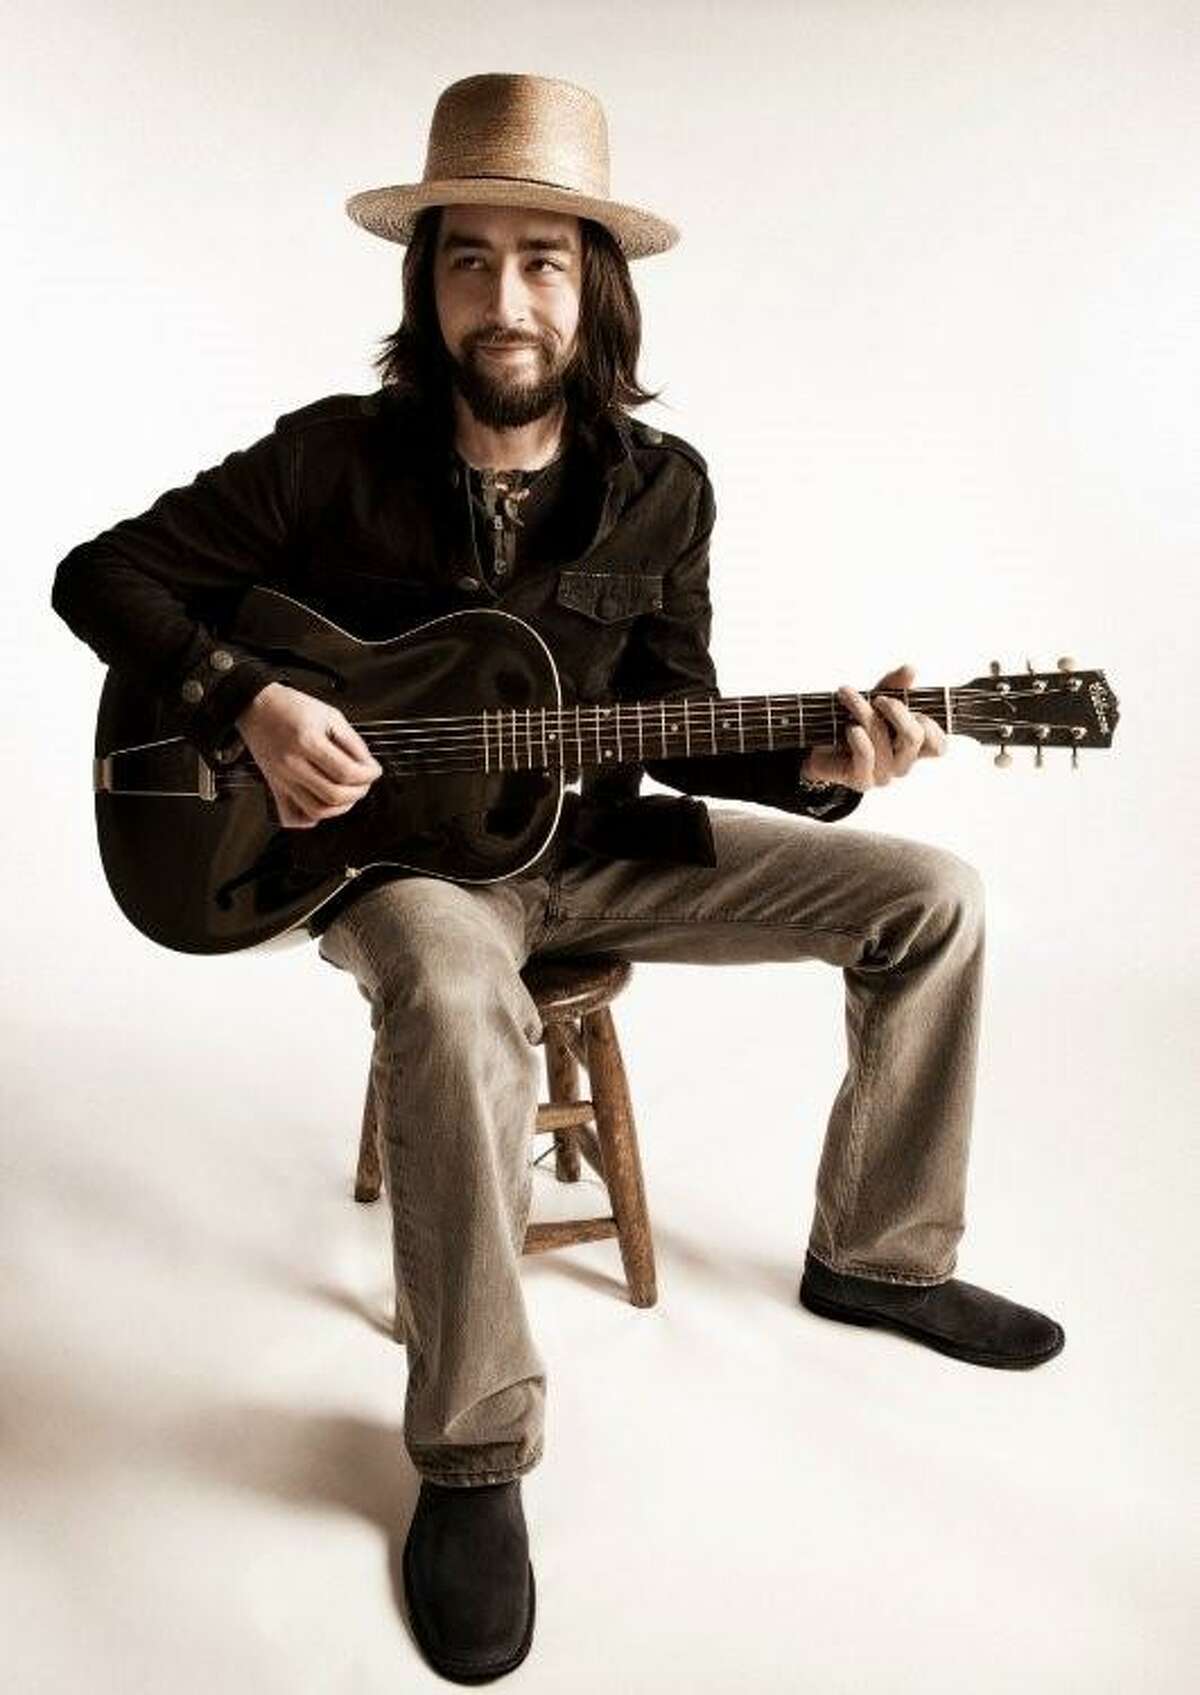 Concert Connection Jackie Greene tickets now available